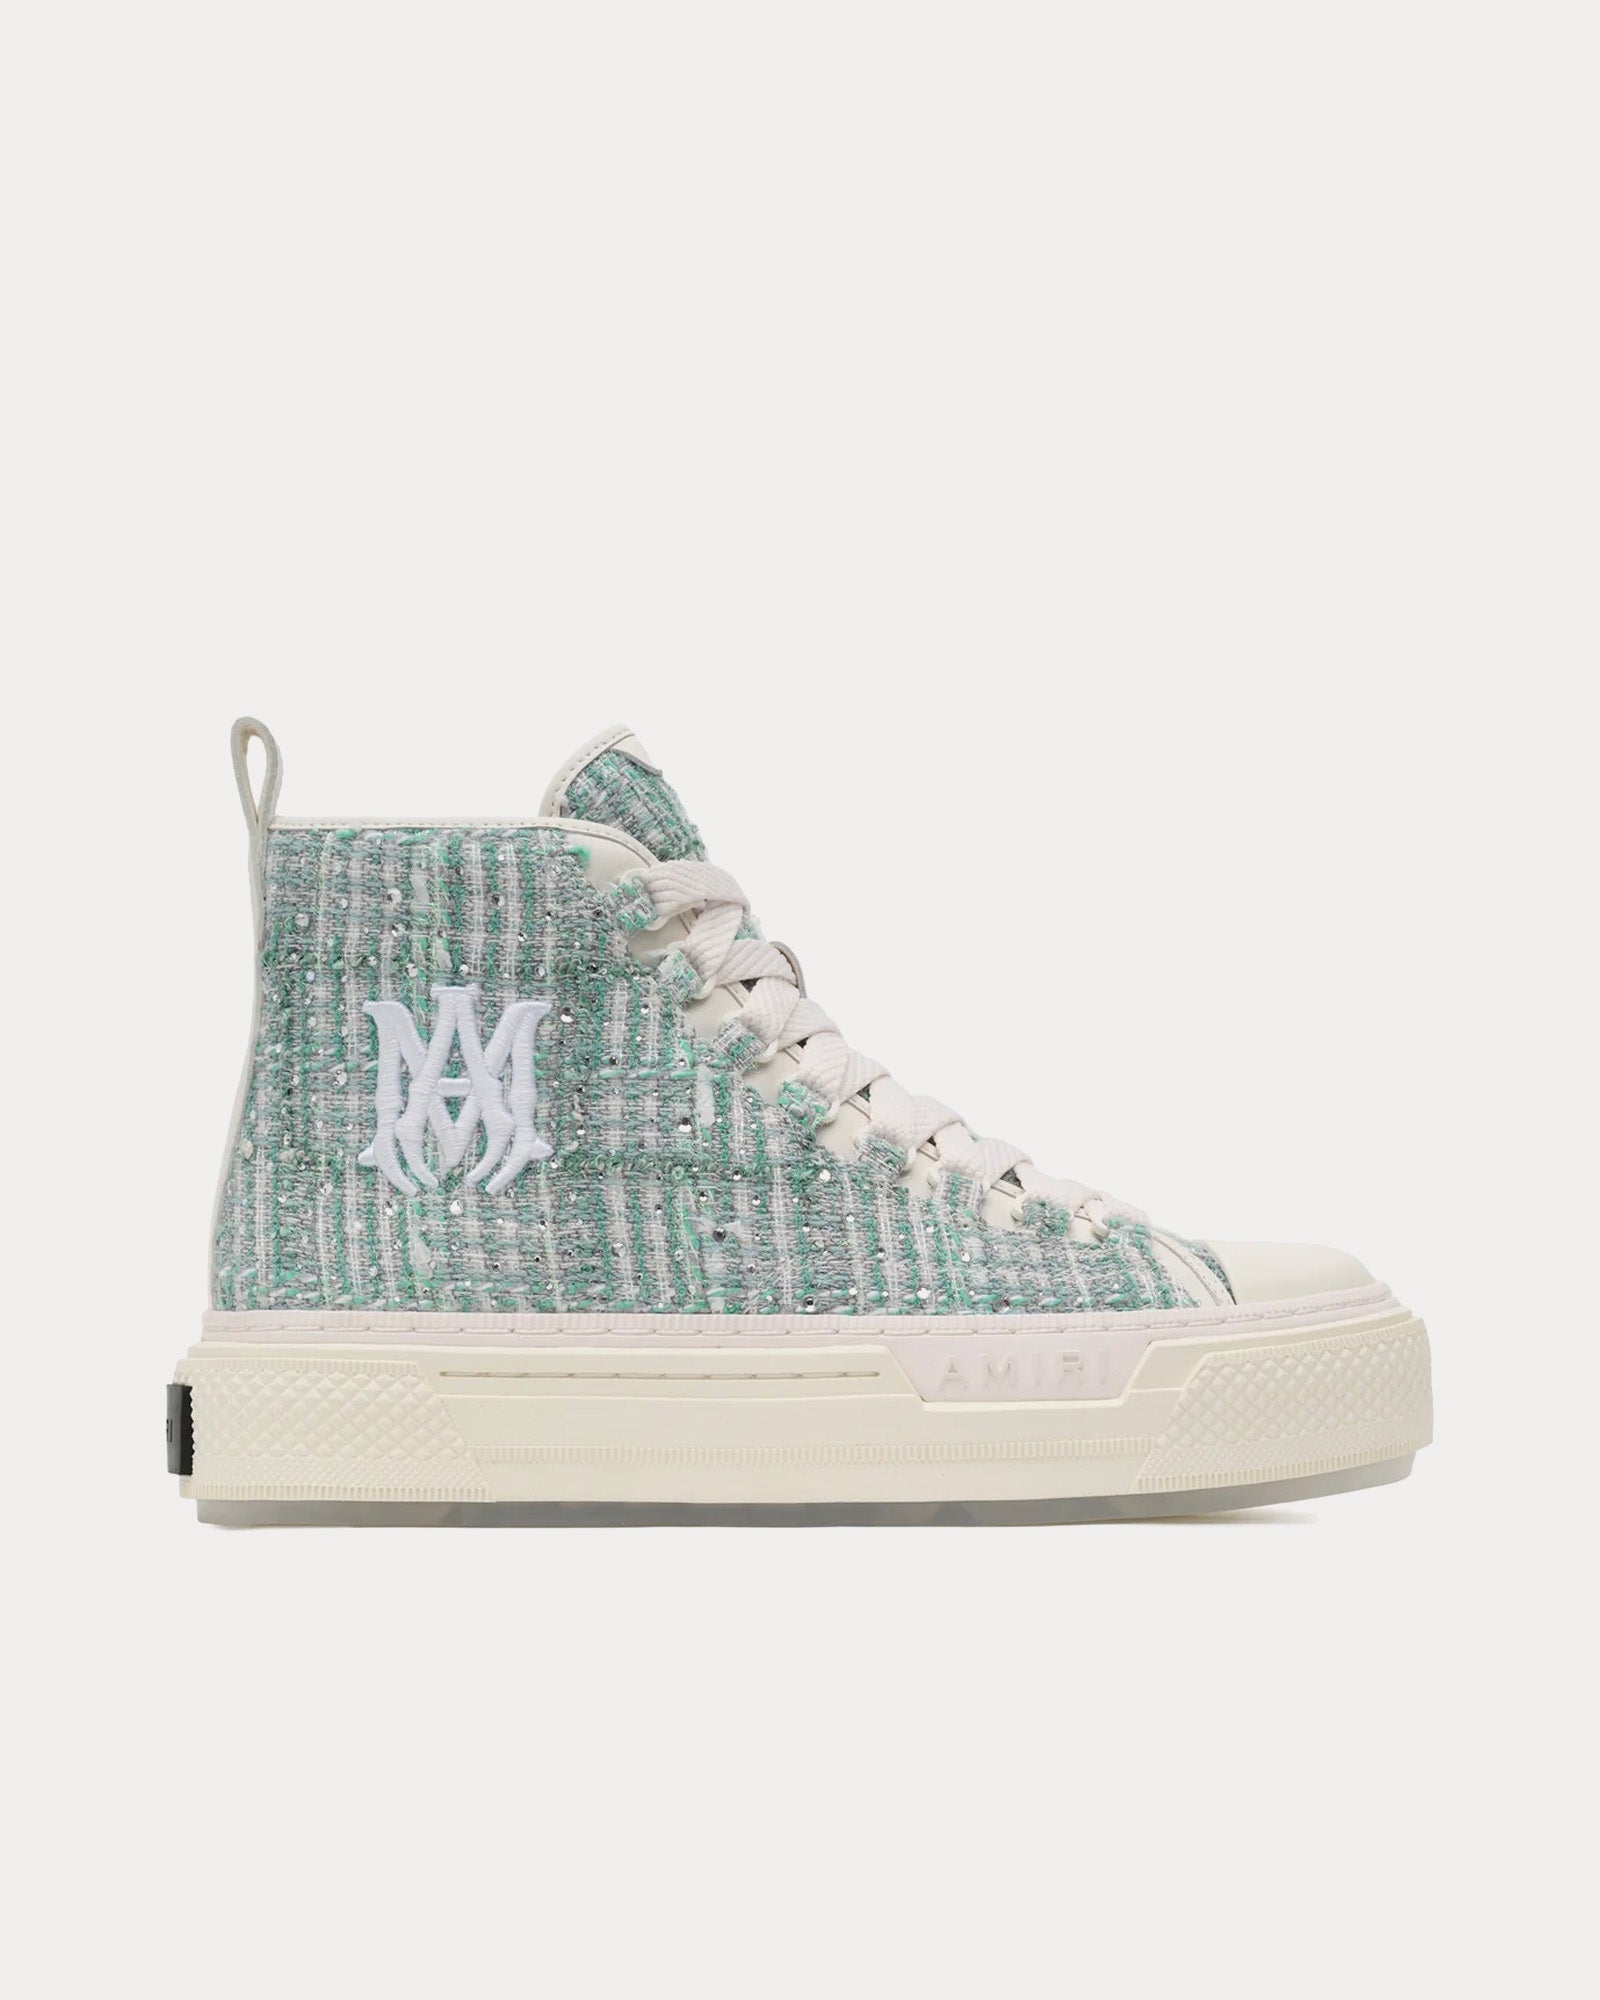 AMIRI - MA Court Boucle Crystal Grey High Top Sneakers